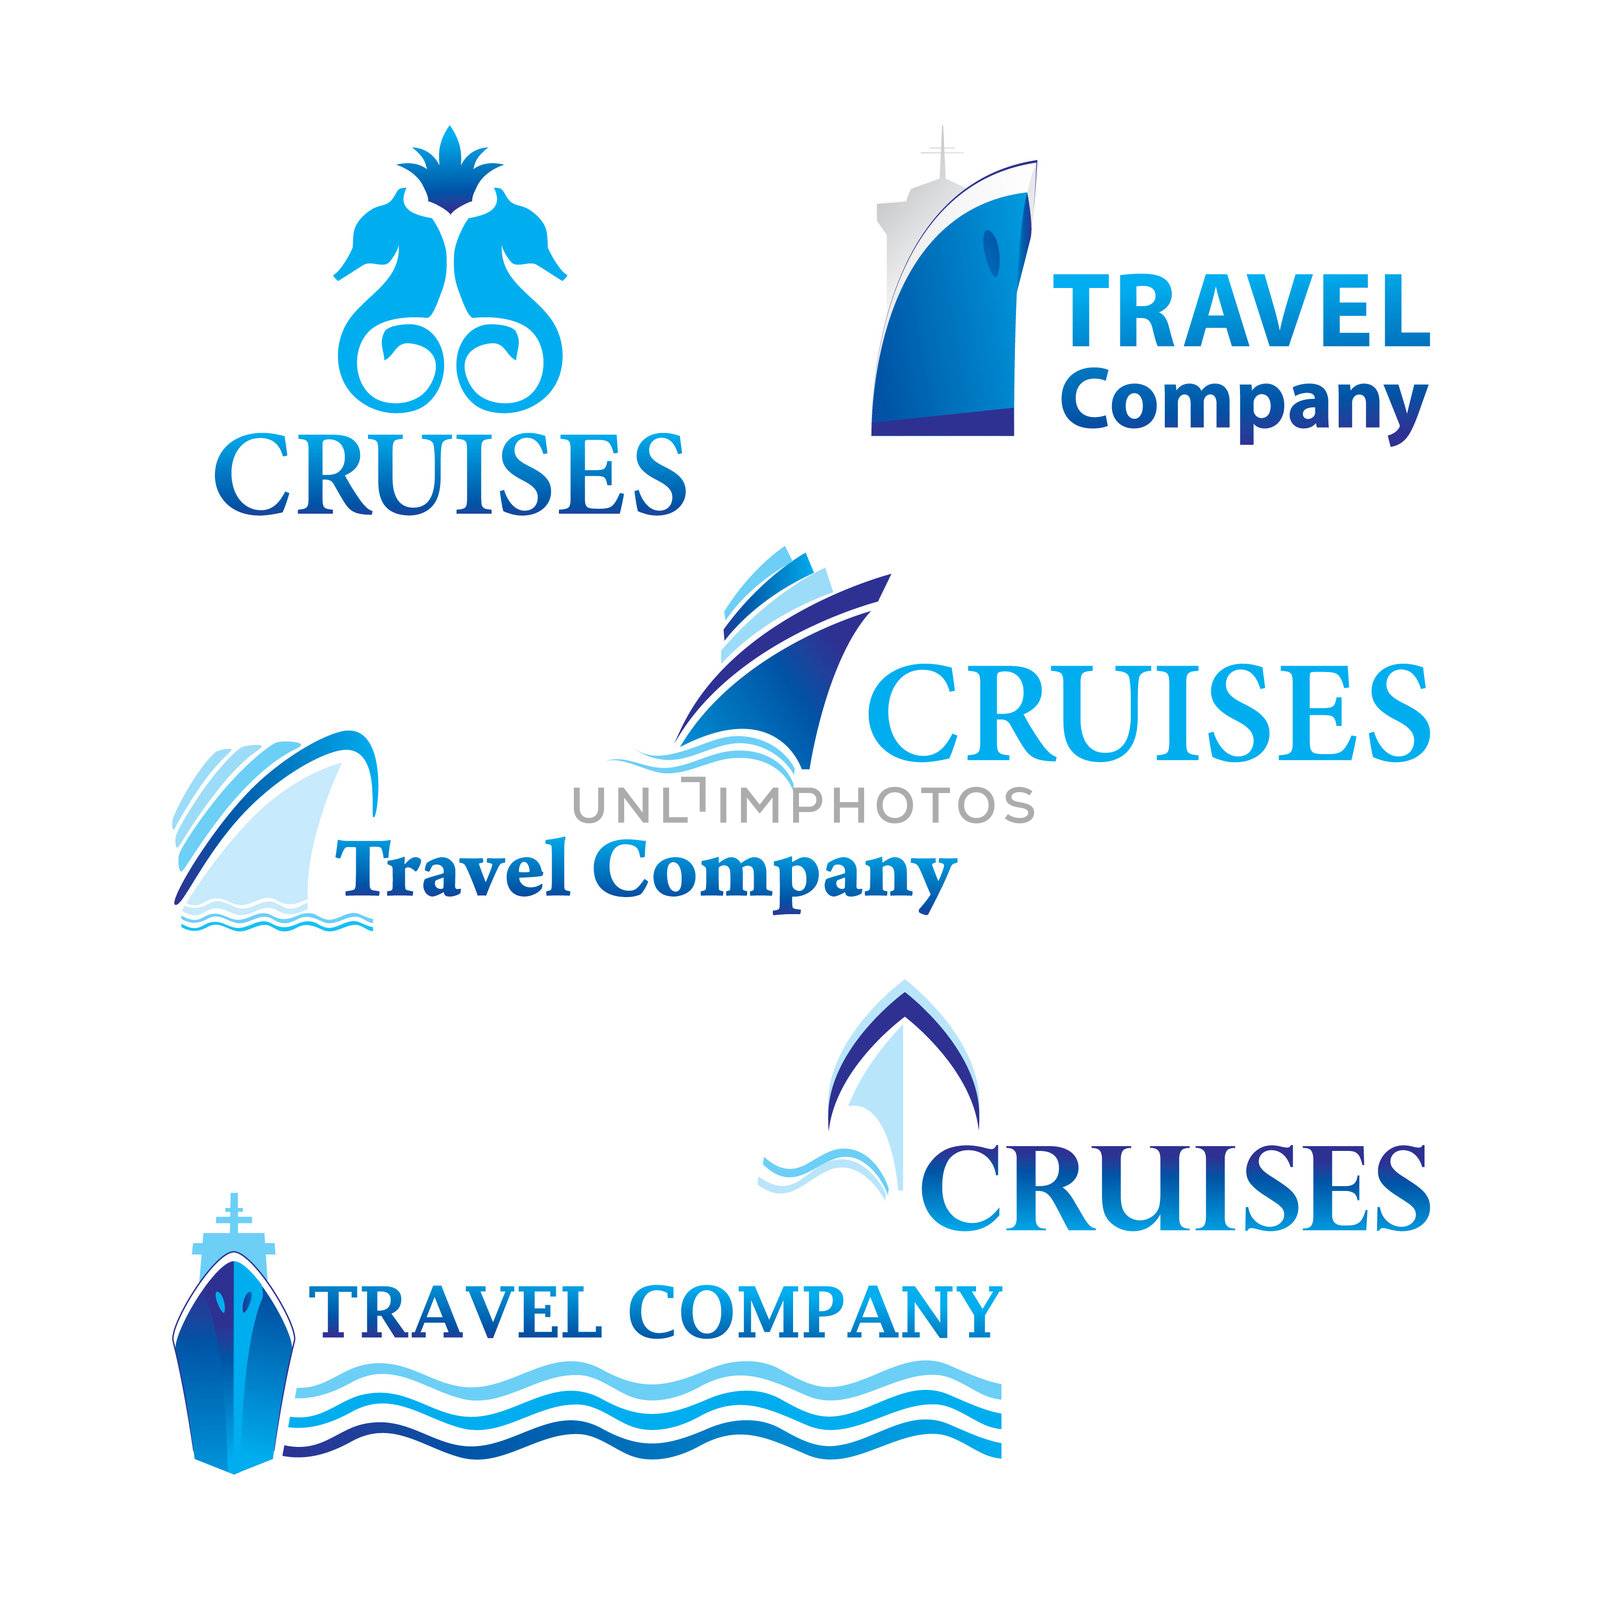 Travel and Cruises. Set of corporate vector logo templates. Just place your own brand name.